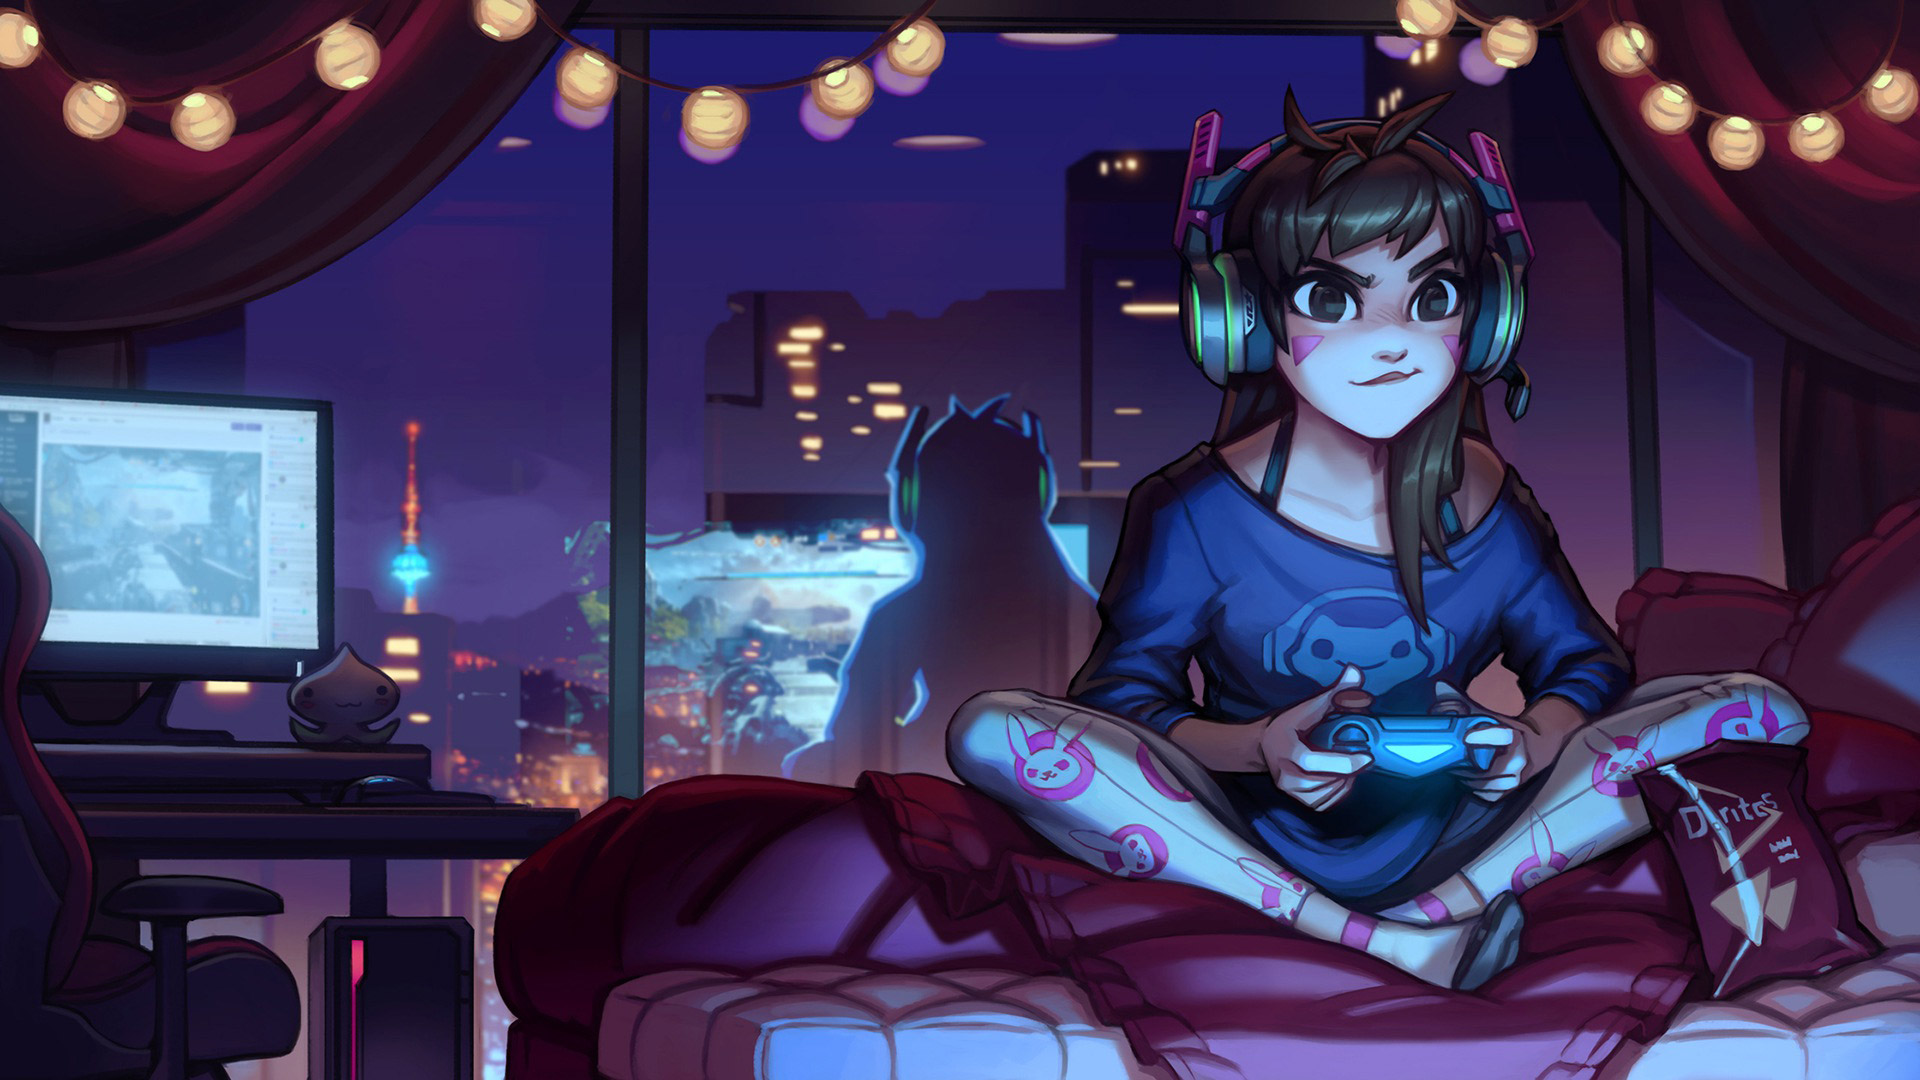 Overwatch Wallpaper In - Anime Girl Playing Video Games - HD Wallpaper 